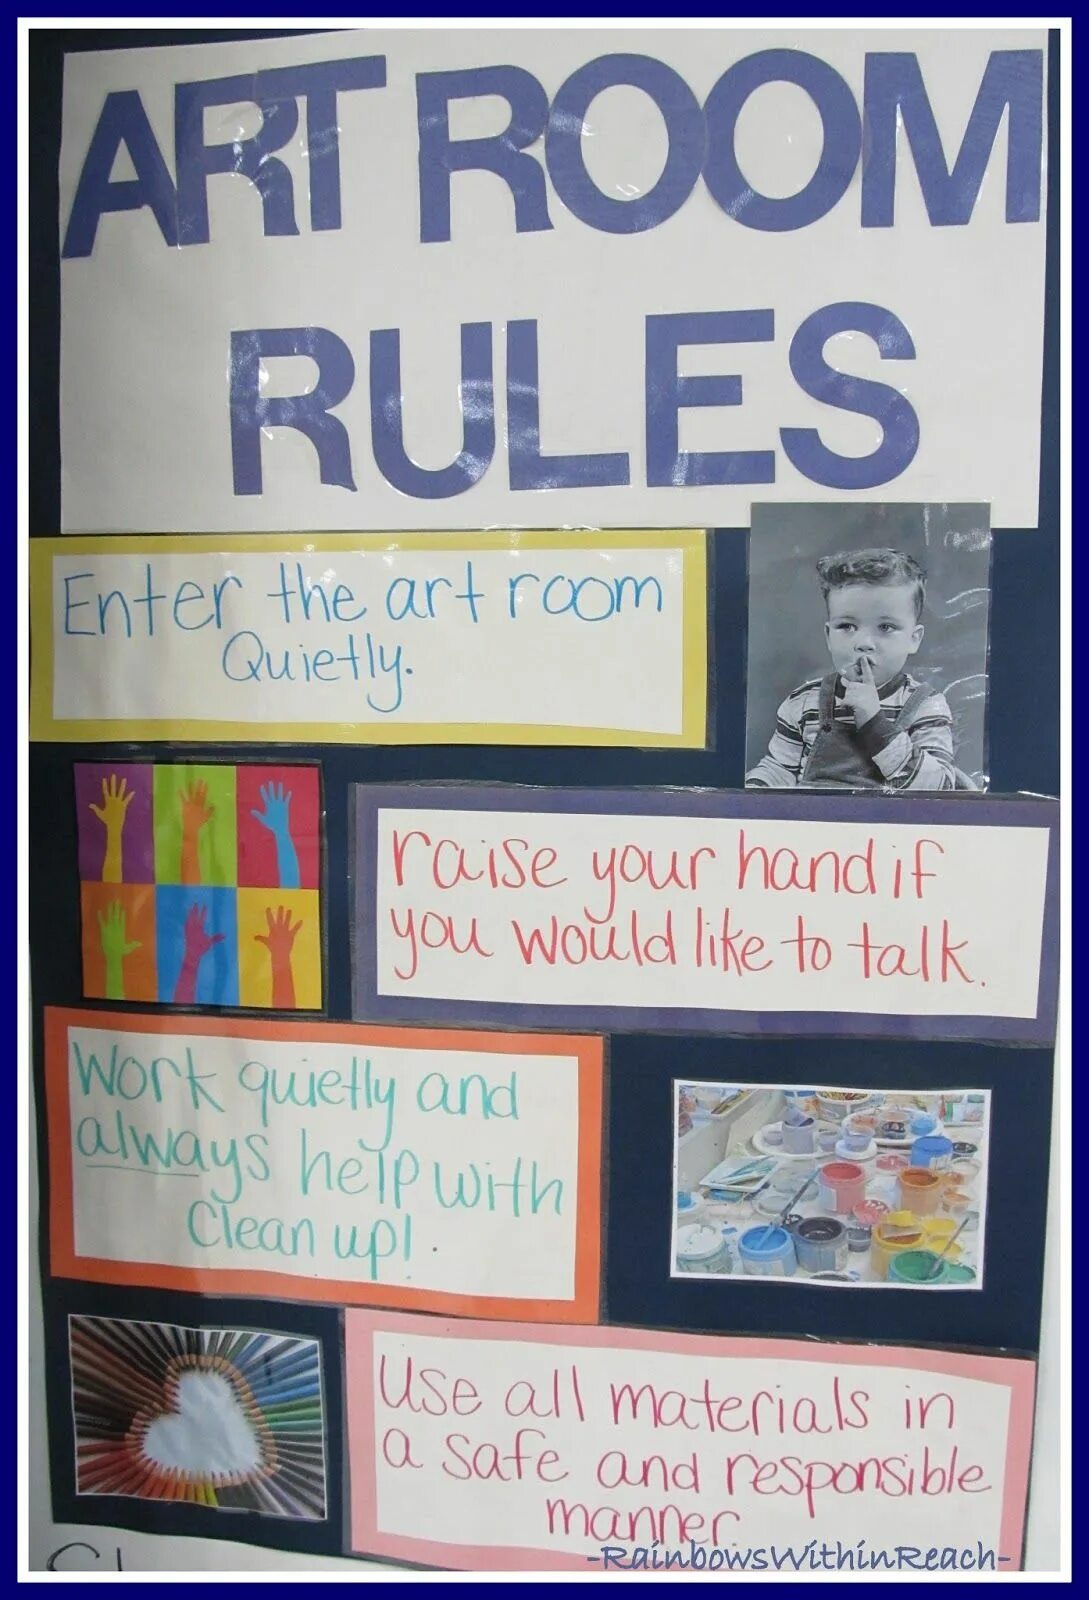 My room rules make a poster write. Плакат my Room Rules. Плакат на тему my Room Rules. Проект Rules of my Room. Плакат my Room Rules 6 класс.